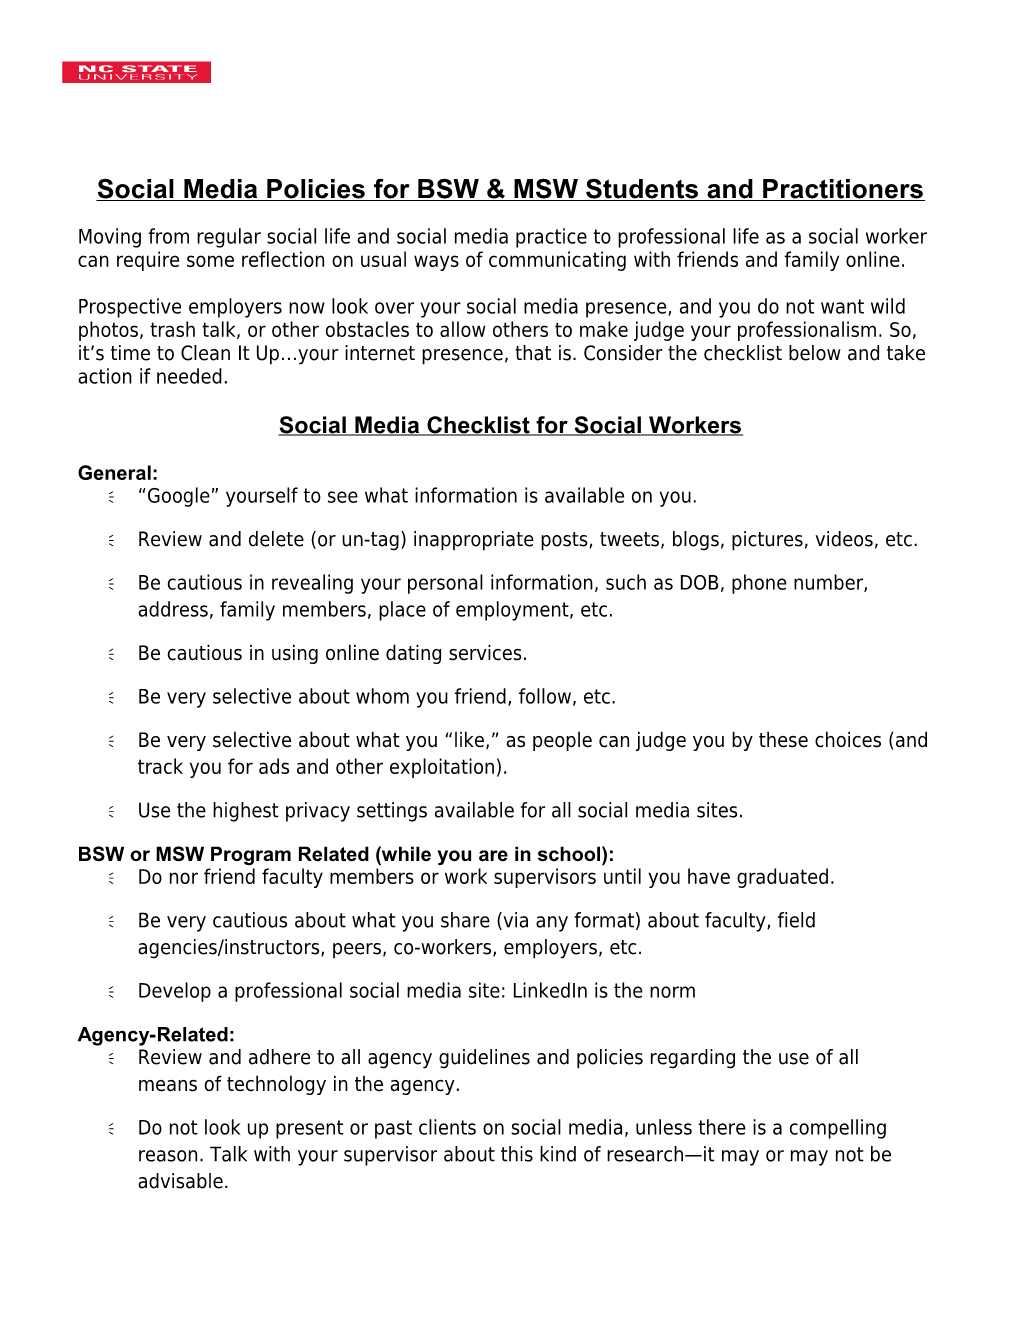 Social Media Policies for BSW & MSW Students and Practitioners